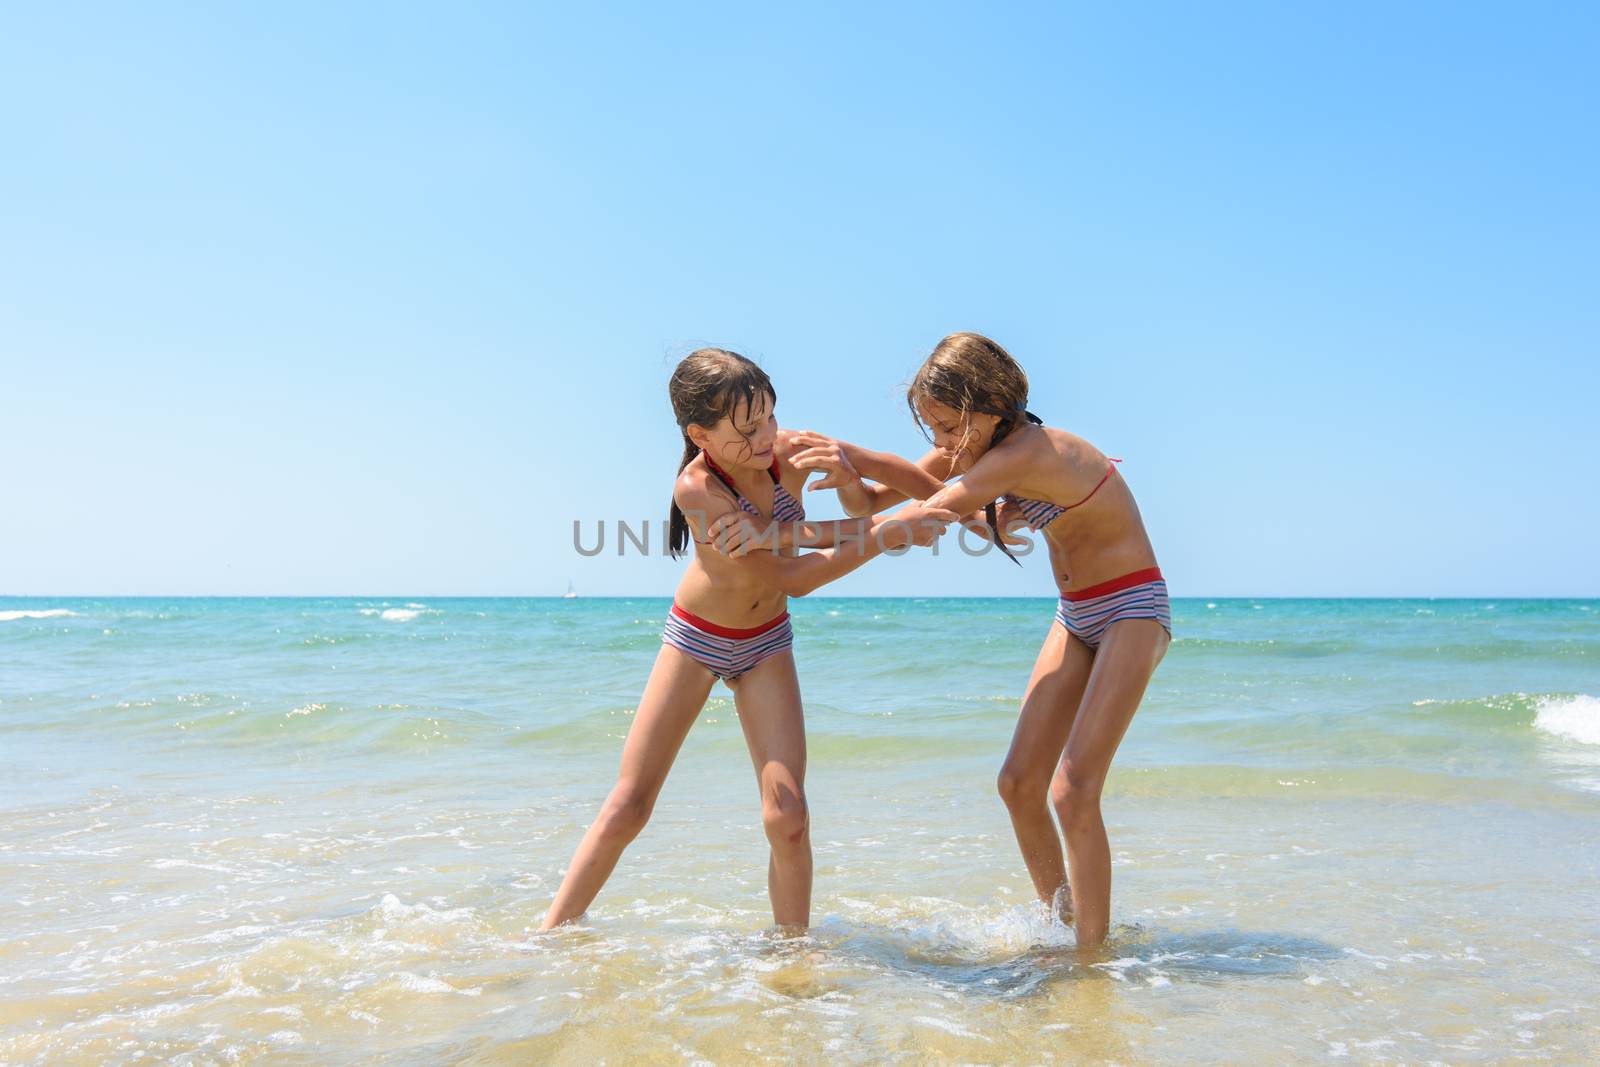 Two girls fight on the sandy beach of the sea